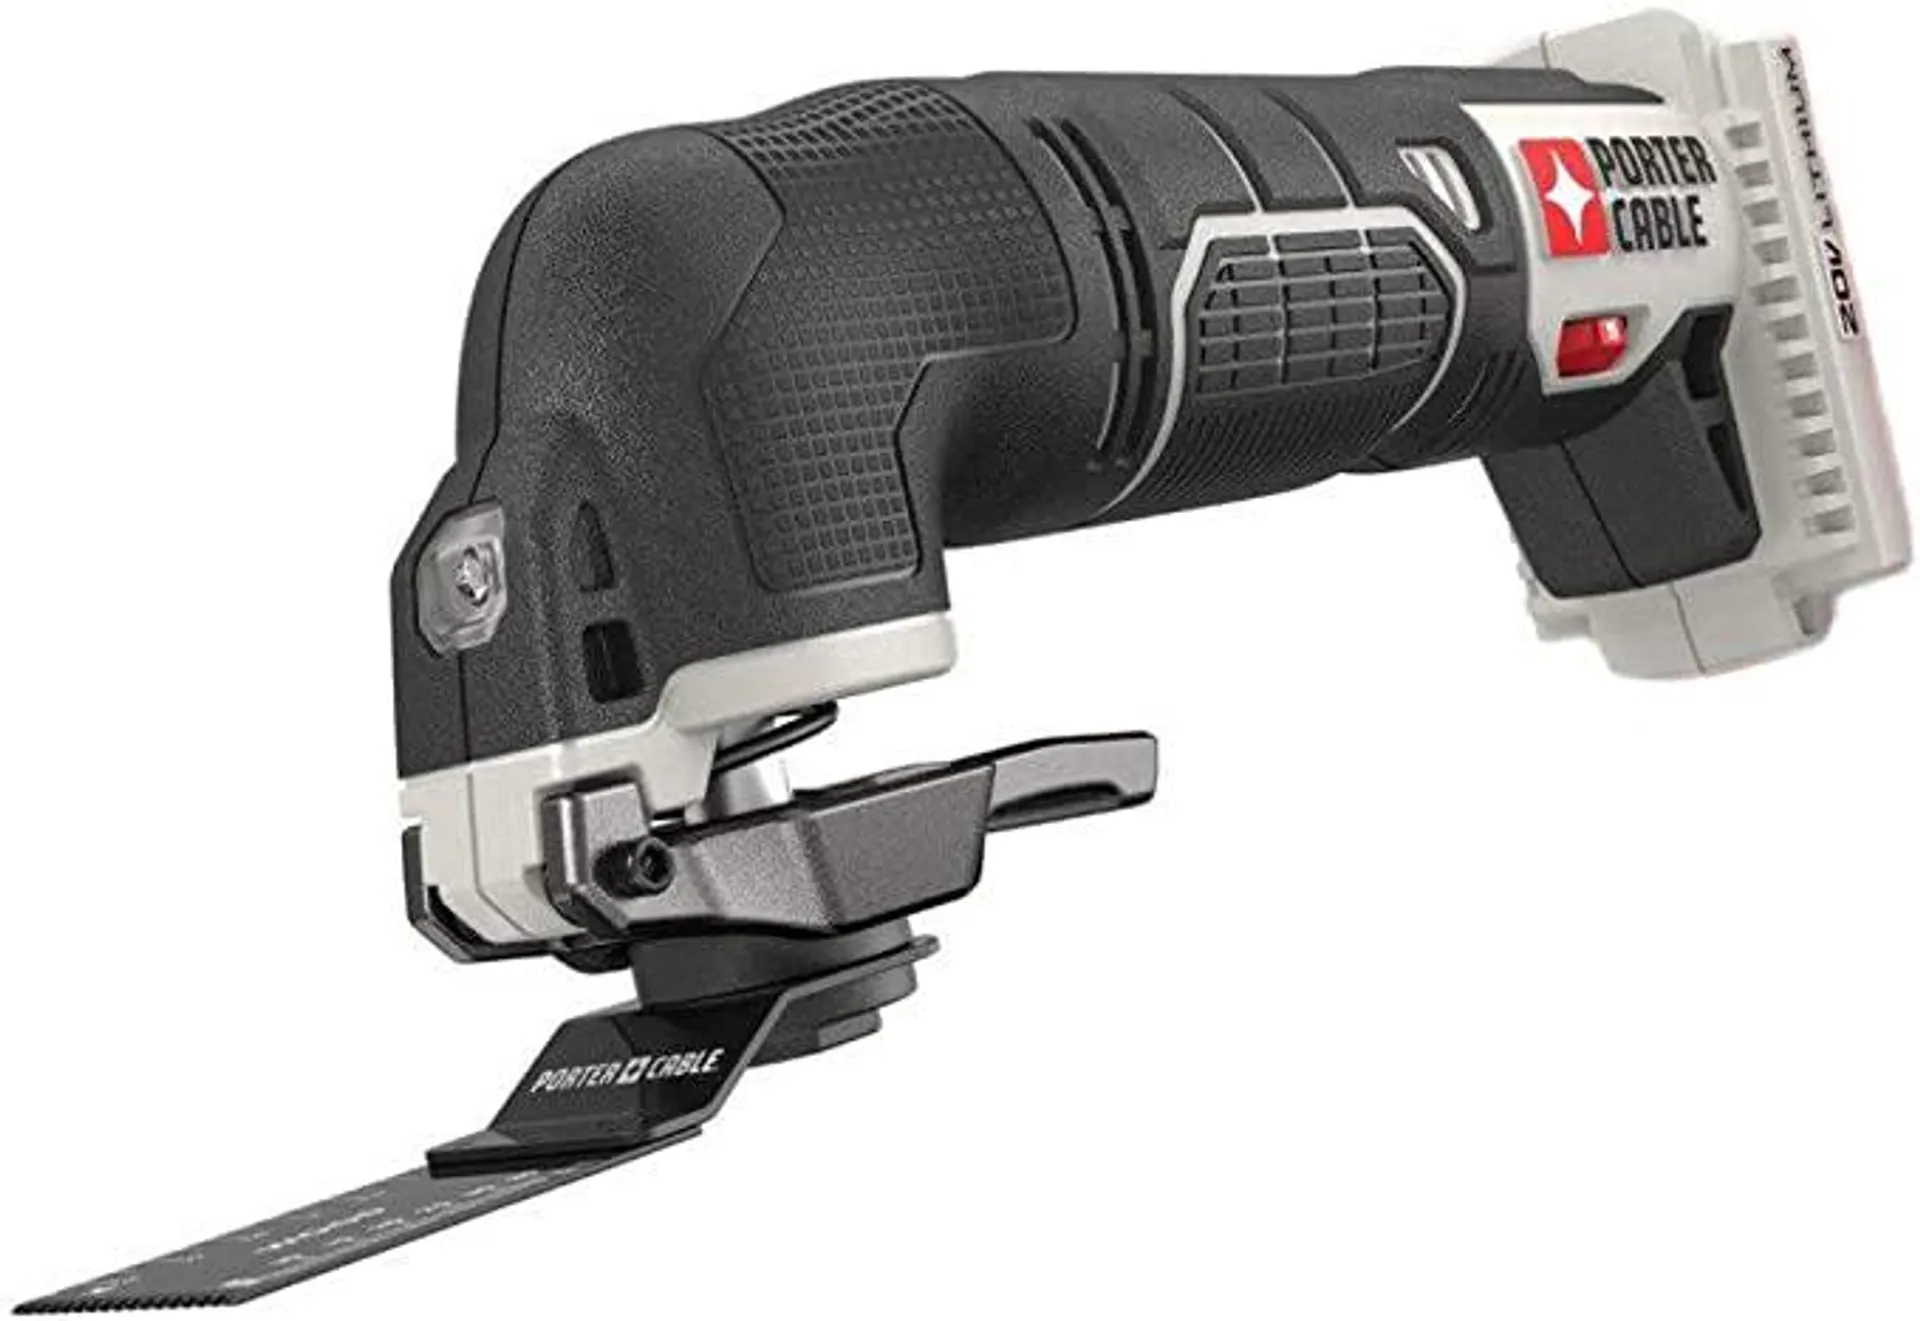 PORTER-CABLE 20V MAX Lithium OSCILLATING Tool Bare